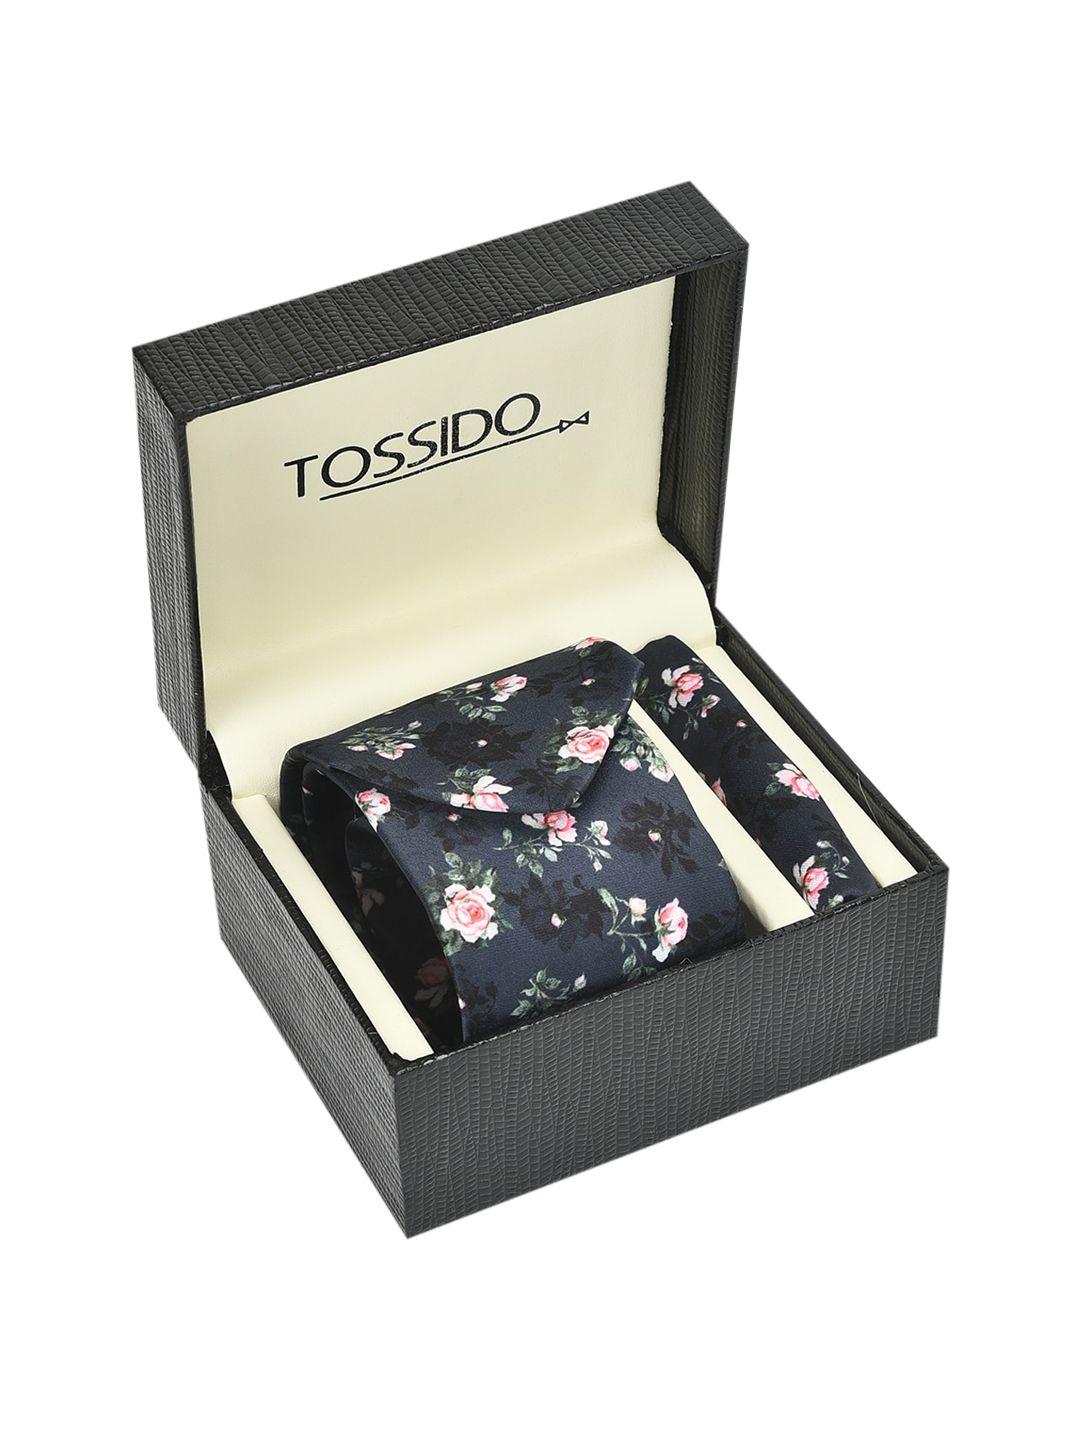 tossido men navy blue & pink printed accessory gift set